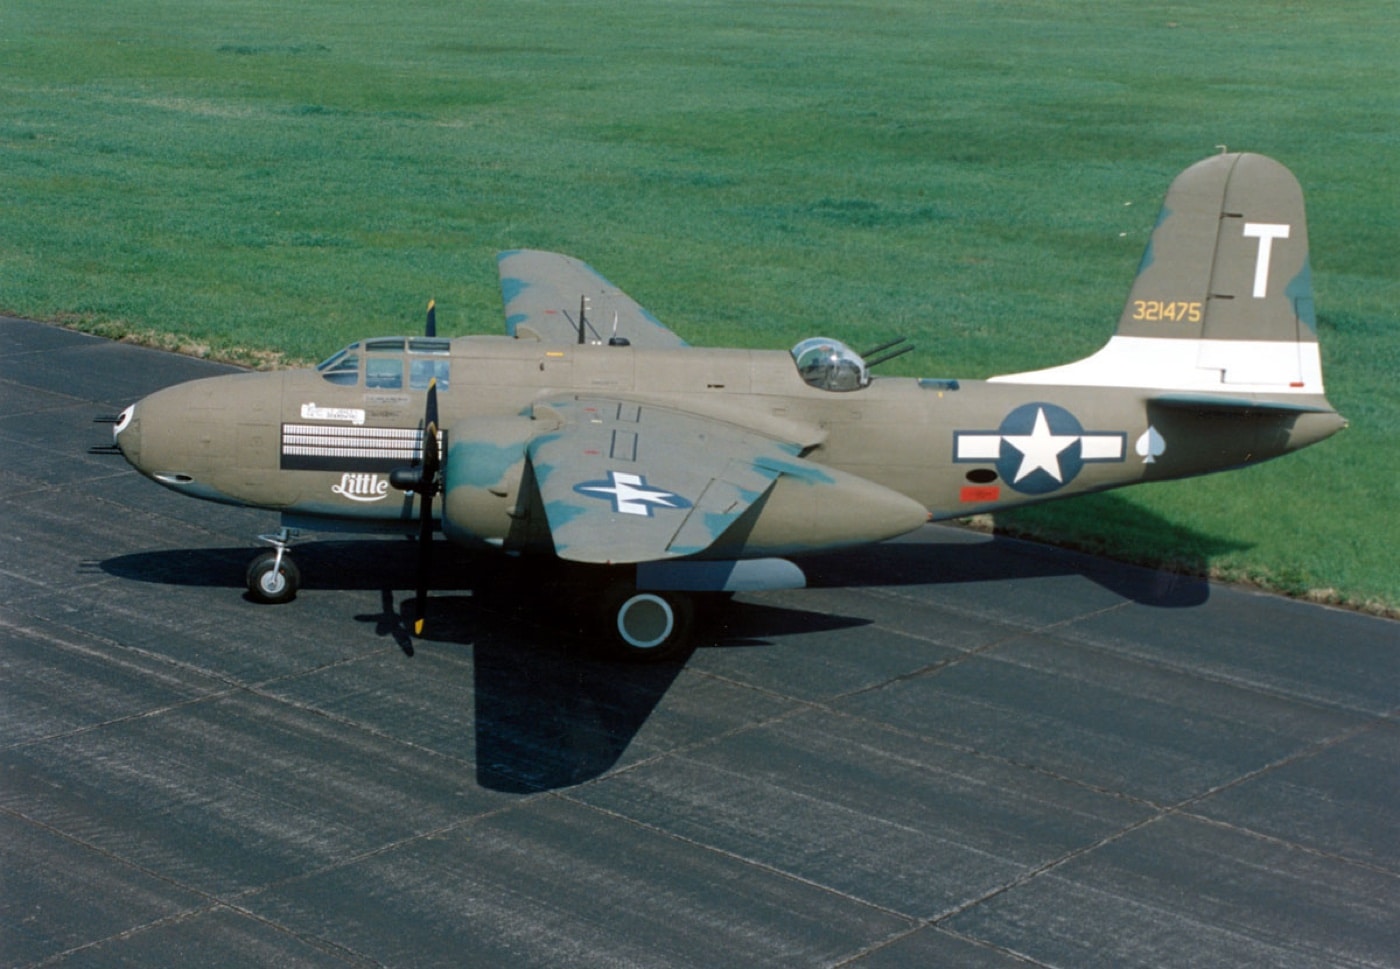 In this 1961 photo, the "Little Joe" A-20G is shown at an airport. The plane was donated to the National Museum of the US Air Force by an insurance company in Chicago Illinois. 